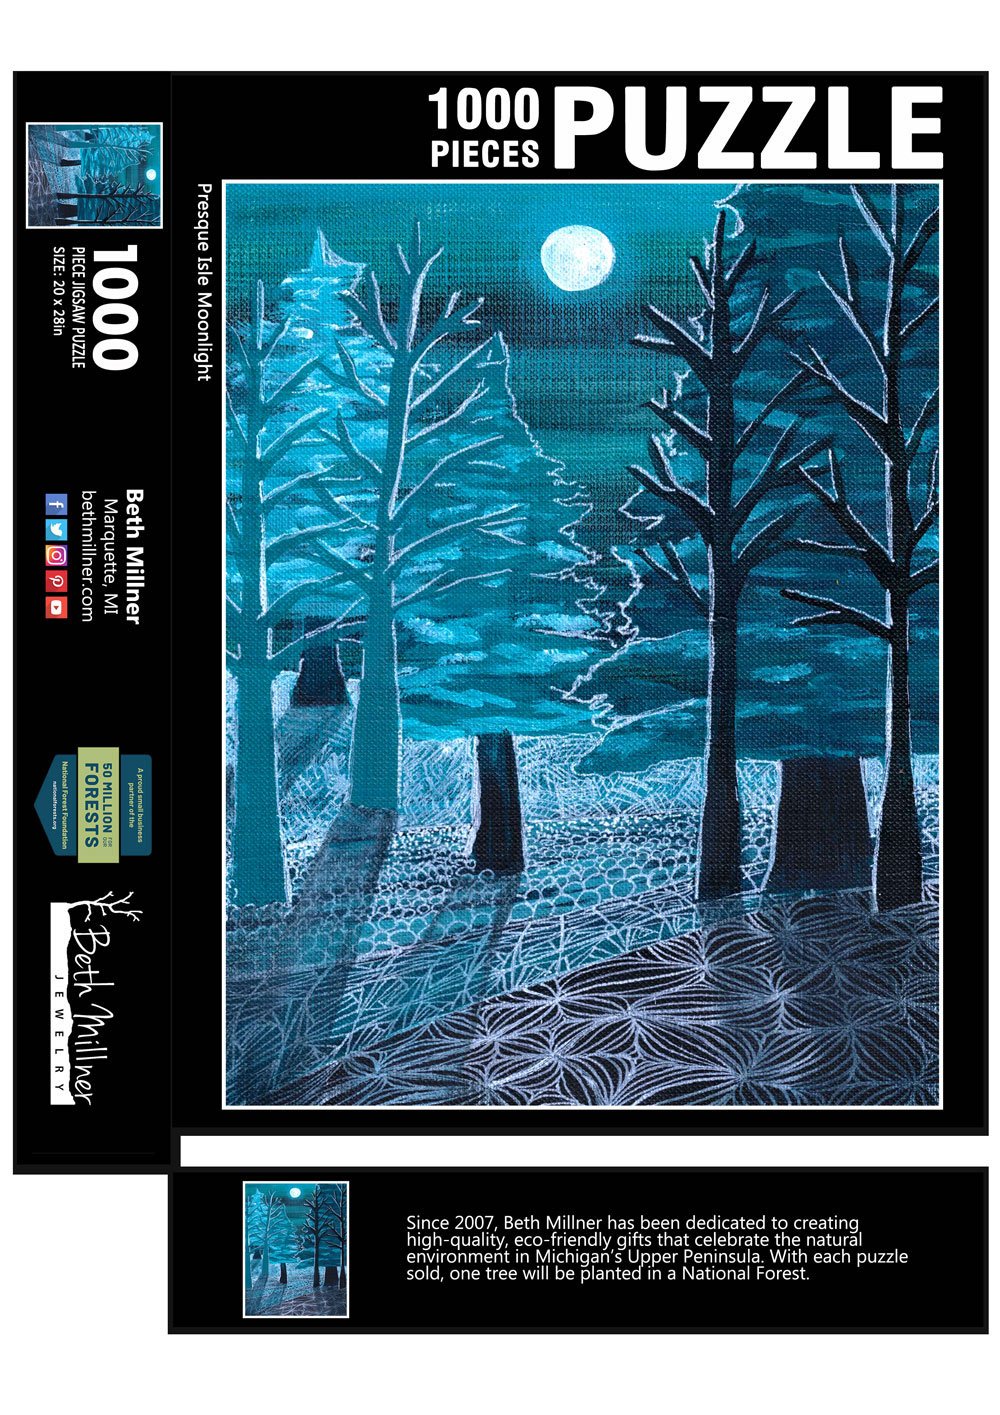 Presque Isle Moonlight 1000 Piece Puzzle - Tree Planted with Purchase - Artisan Goods   5672 - handmade by Beth Millner Jewelry